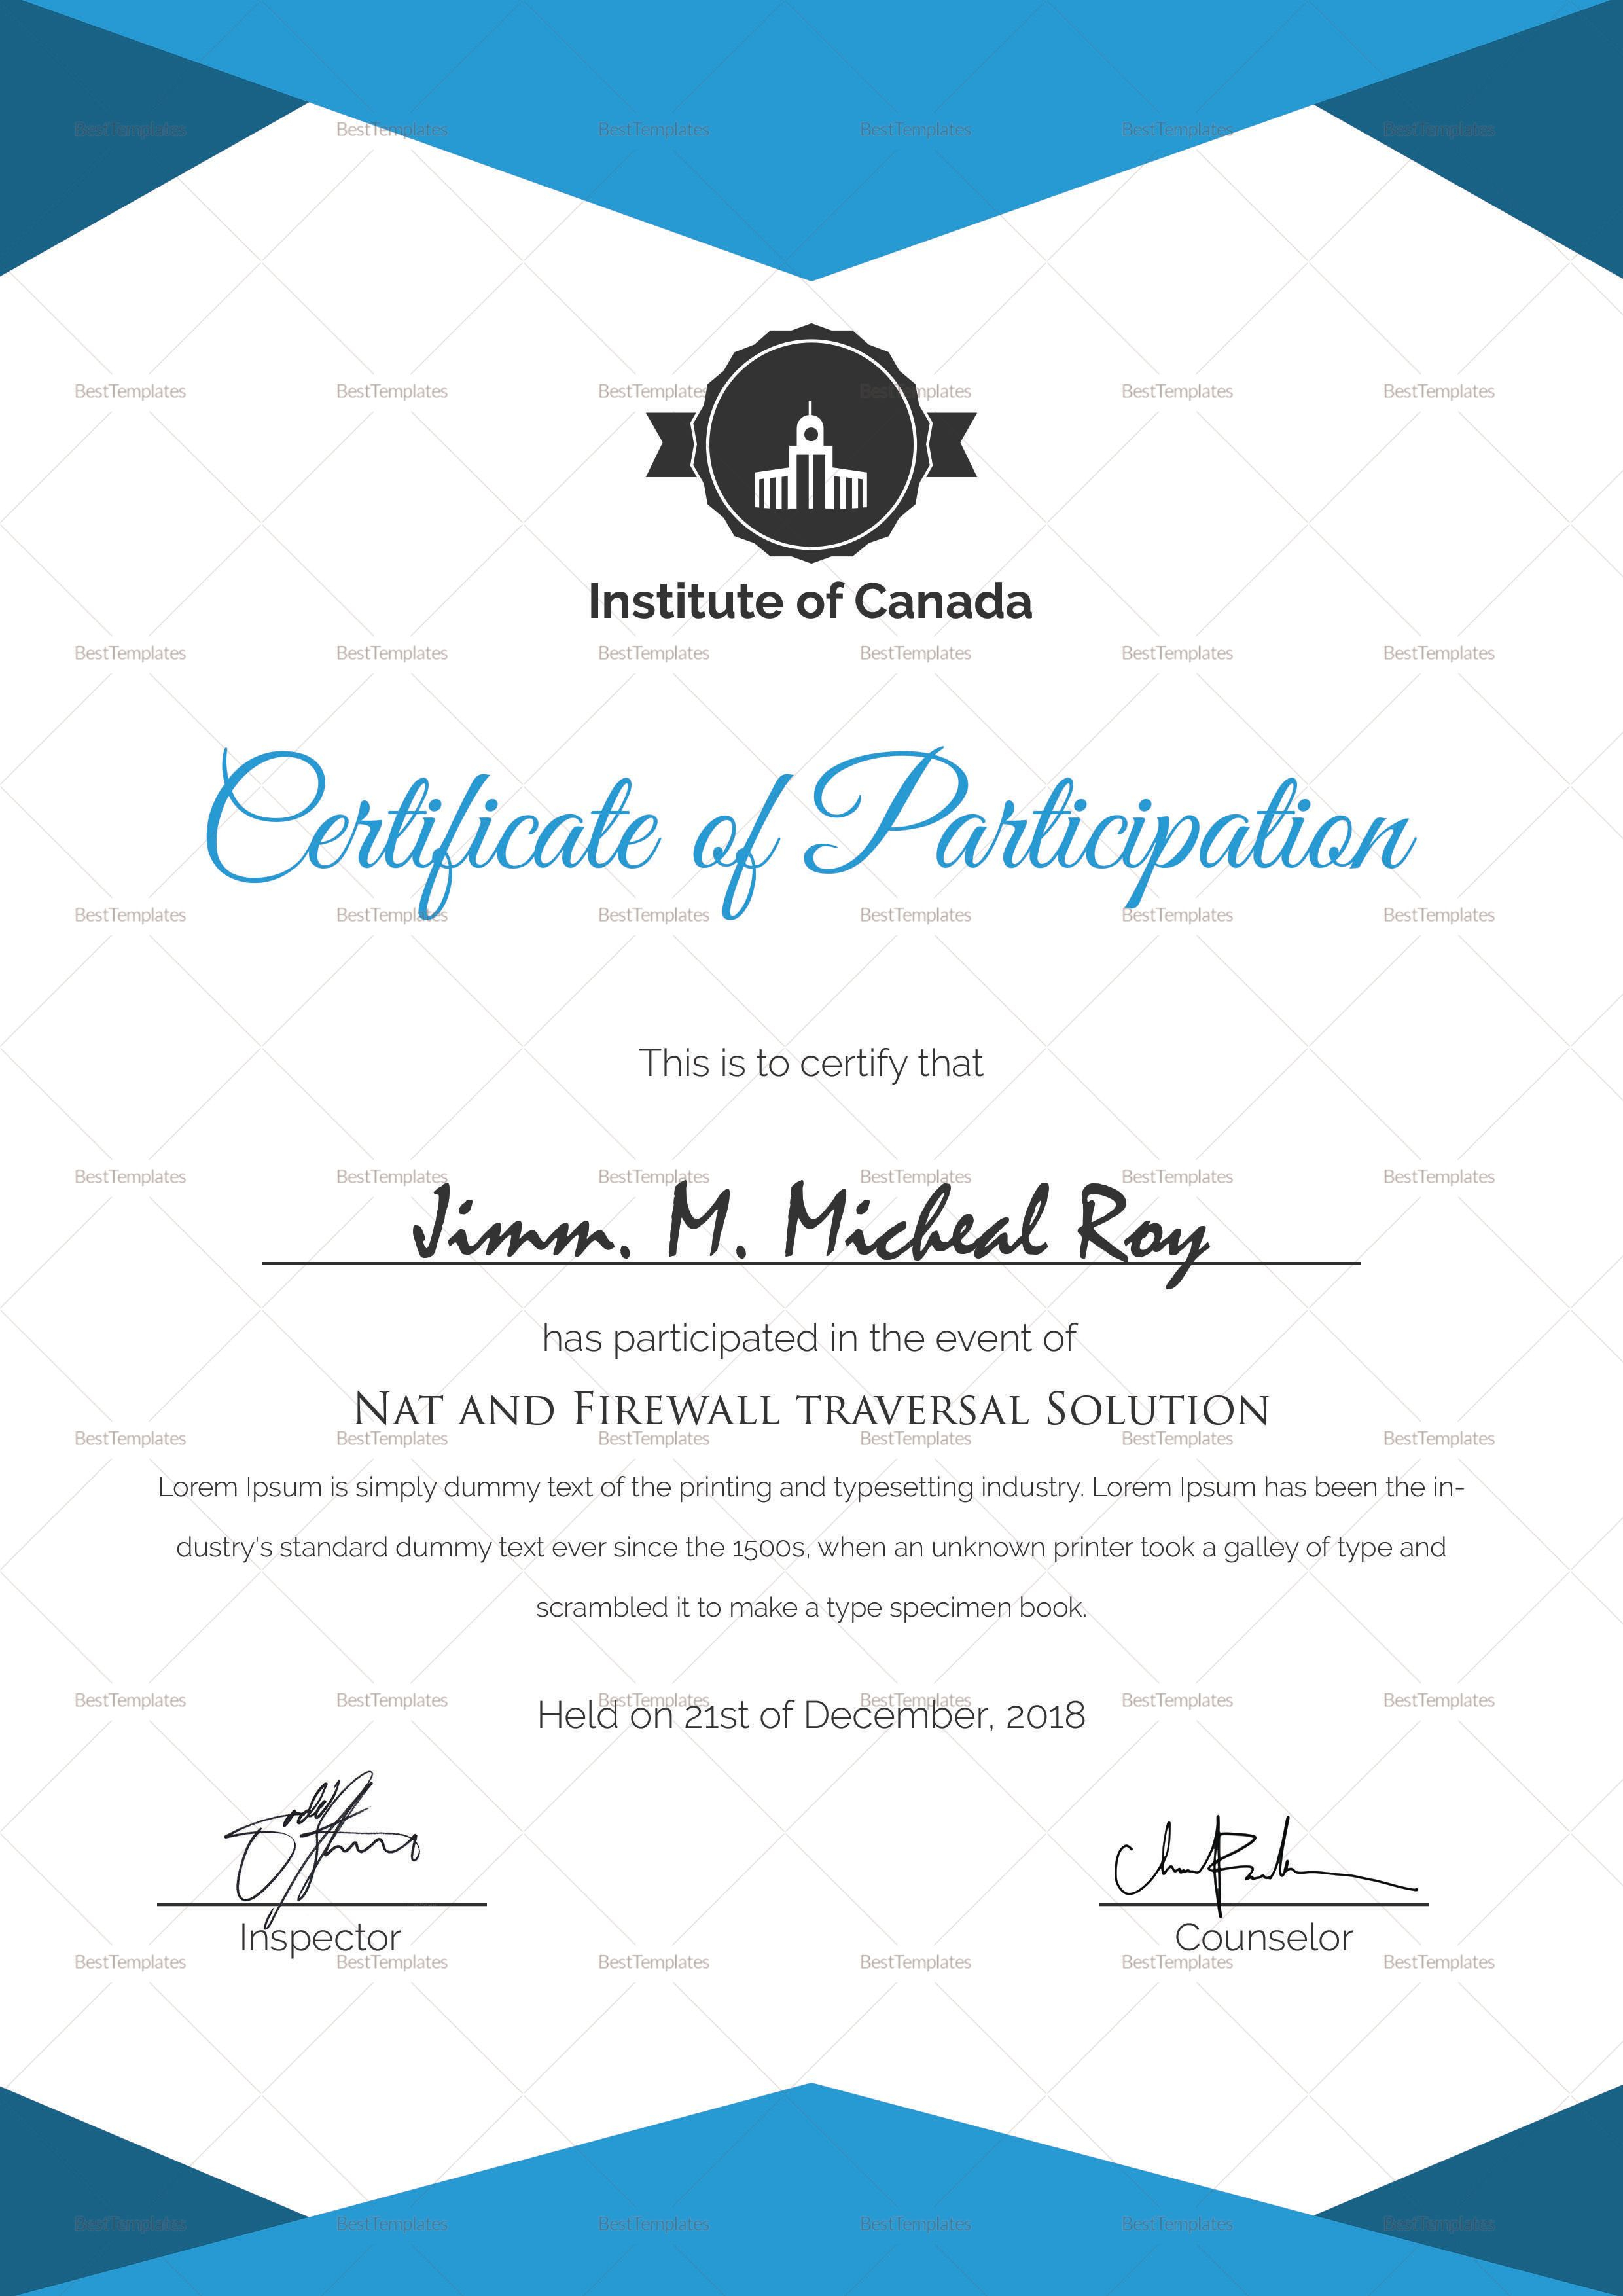 Sample Certificate Of Participation Template | Searchere Intended For Sample Certificate Of Participation Template